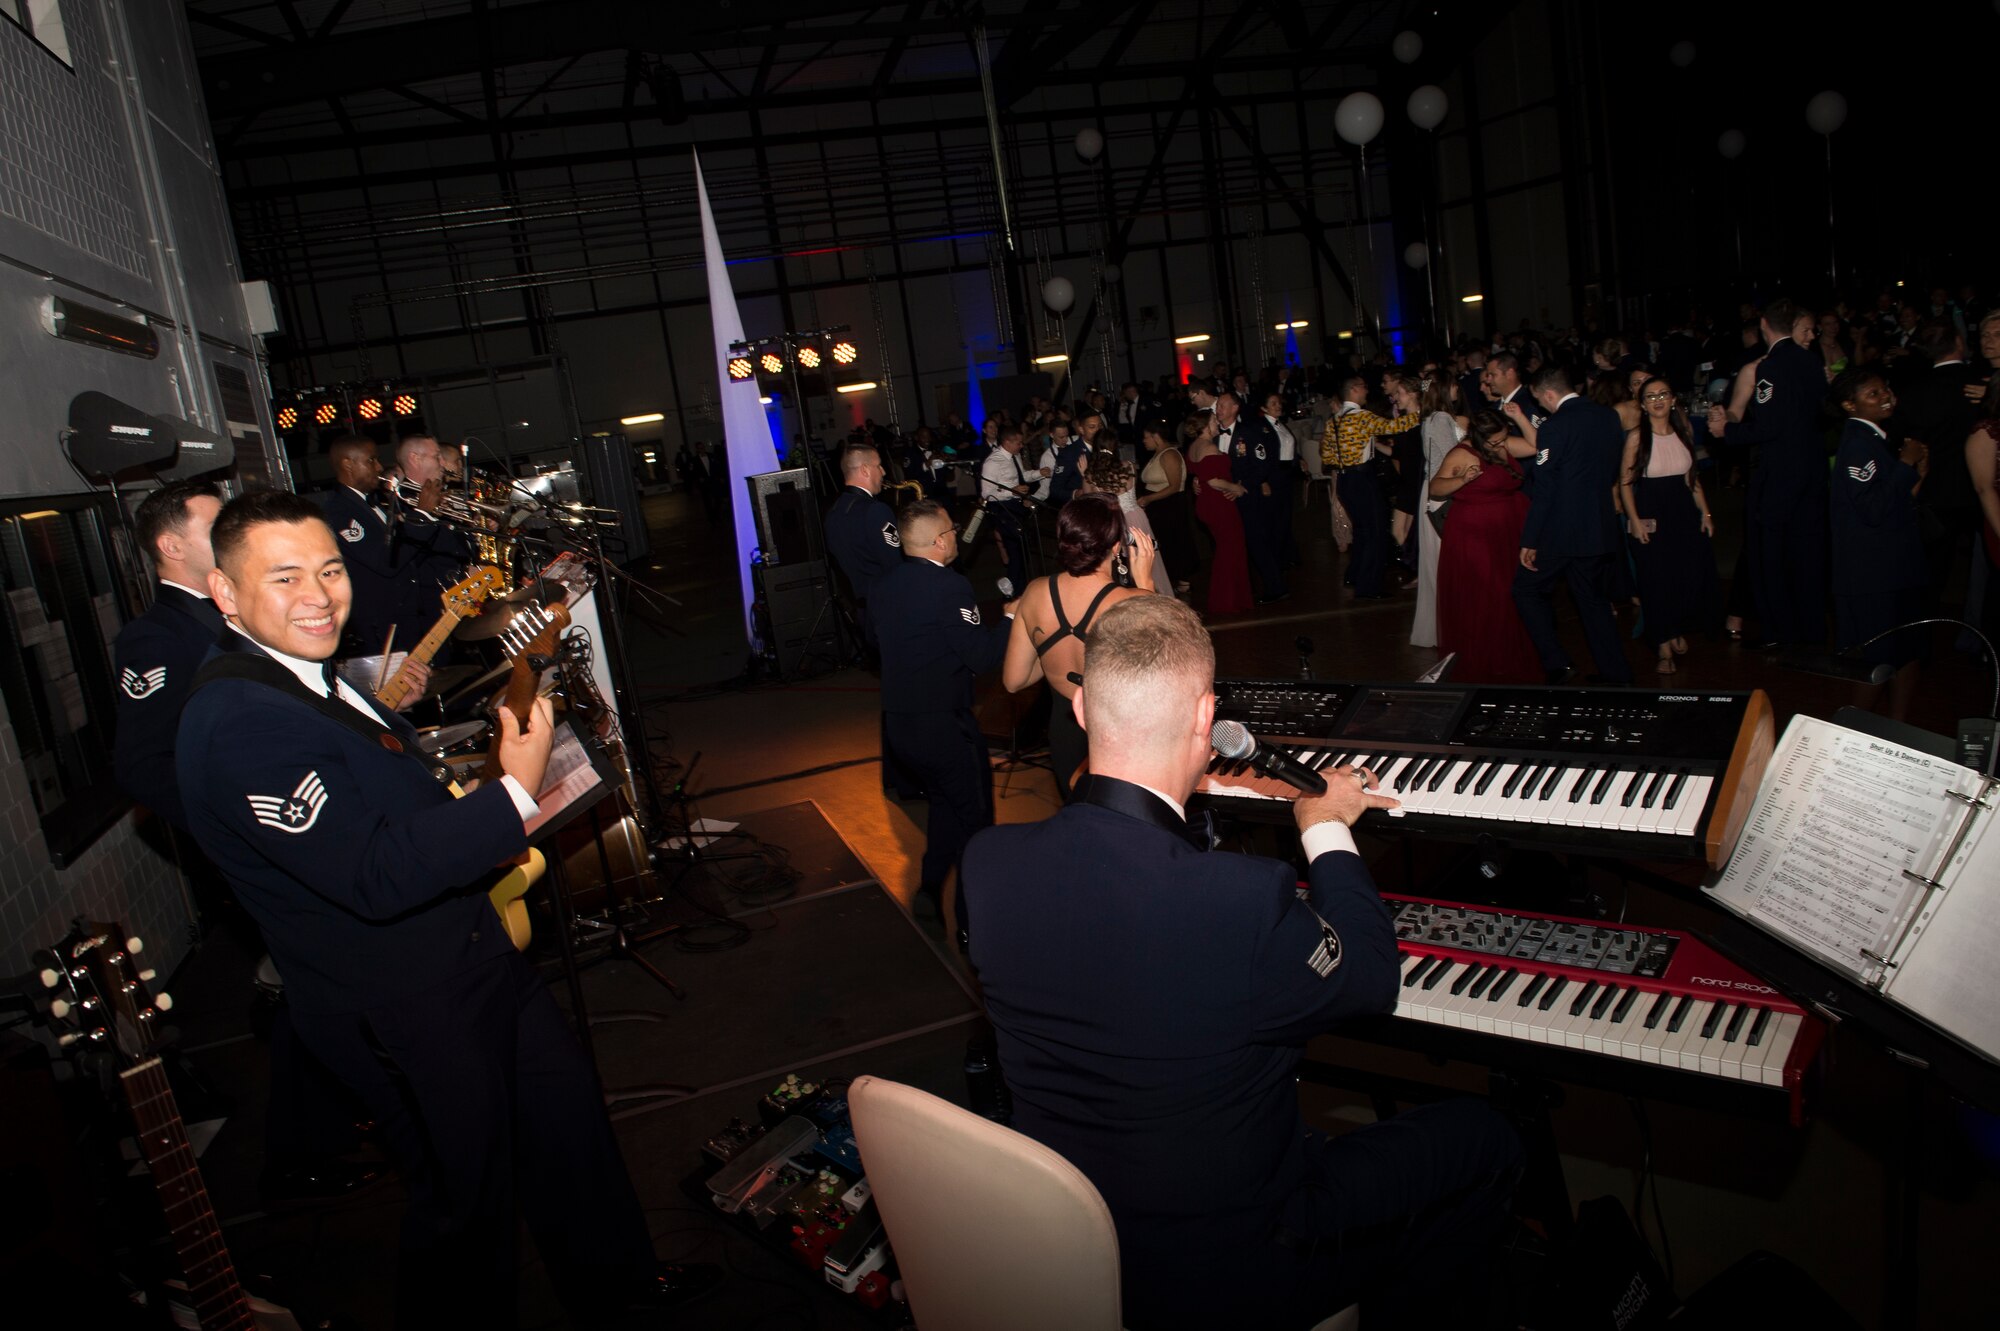 The U.S. Air Forces in Europe Jazz and Rock bands perform during the 72nd Air Force birthday ball at Ramstein Air Base, Germany, Sept. 21, 2019. The bands played two sets, a formal jazz set during the dinner portion and a dance set after the formal portion of the evening. (U.S. Air Force photo by Staff Sgt. Jonathan Bass)